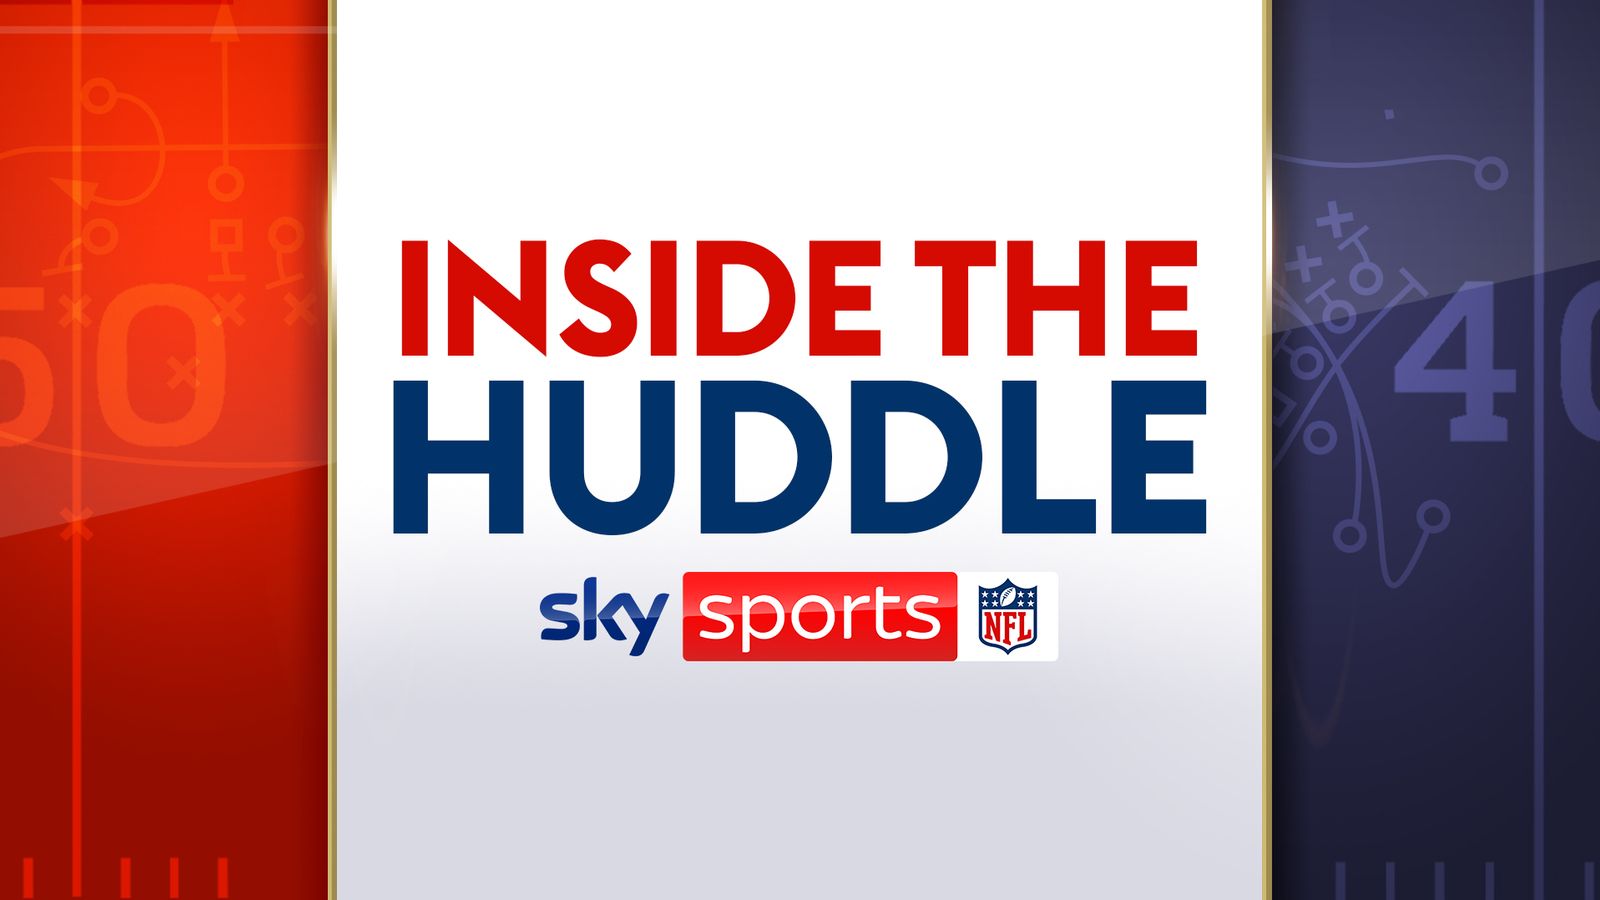 Inside the Huddle season preview: Interviews with Patrick Mahomes, Justin Jefferson, Brock Purdy and more | NFL News